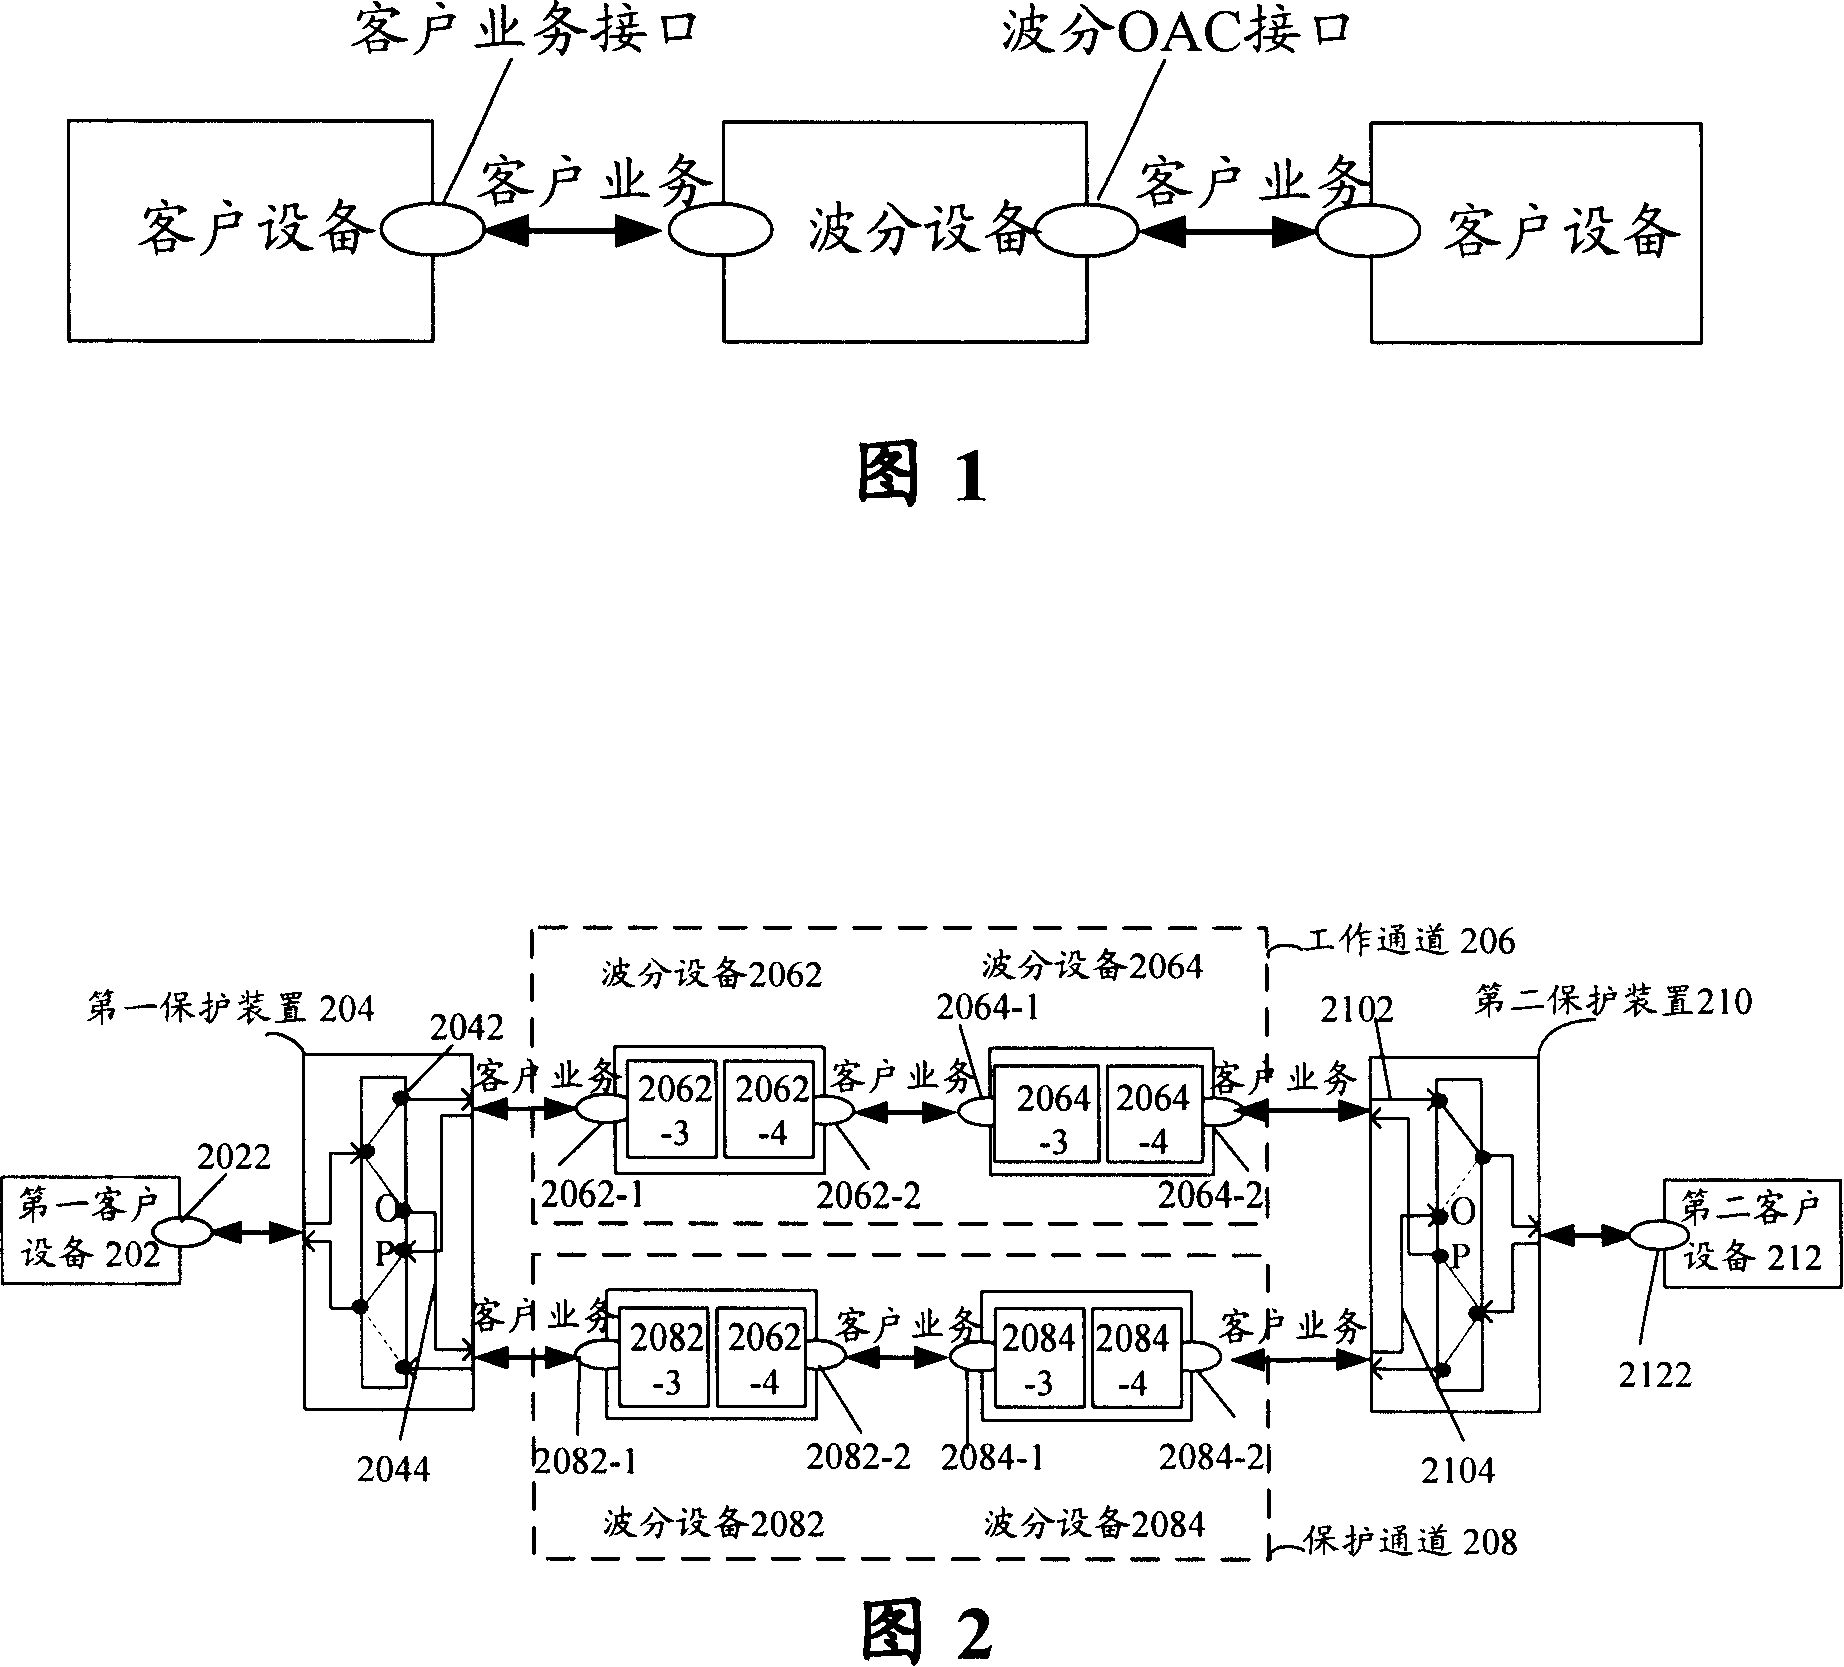 Protection switching system and method for wavelength division multiplexing load client network